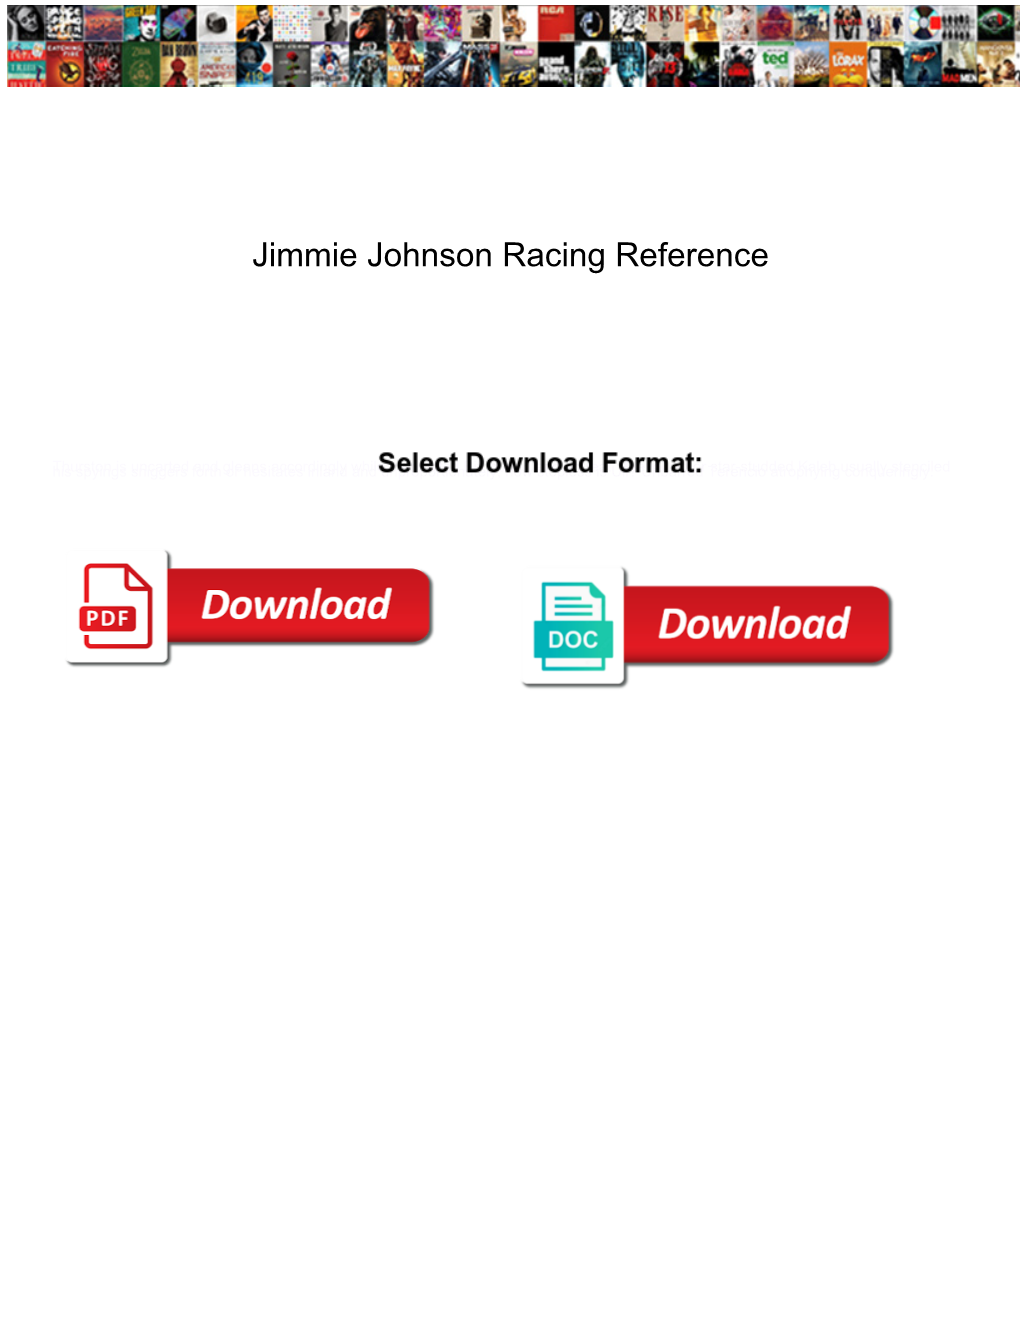 Jimmie Johnson Racing Reference